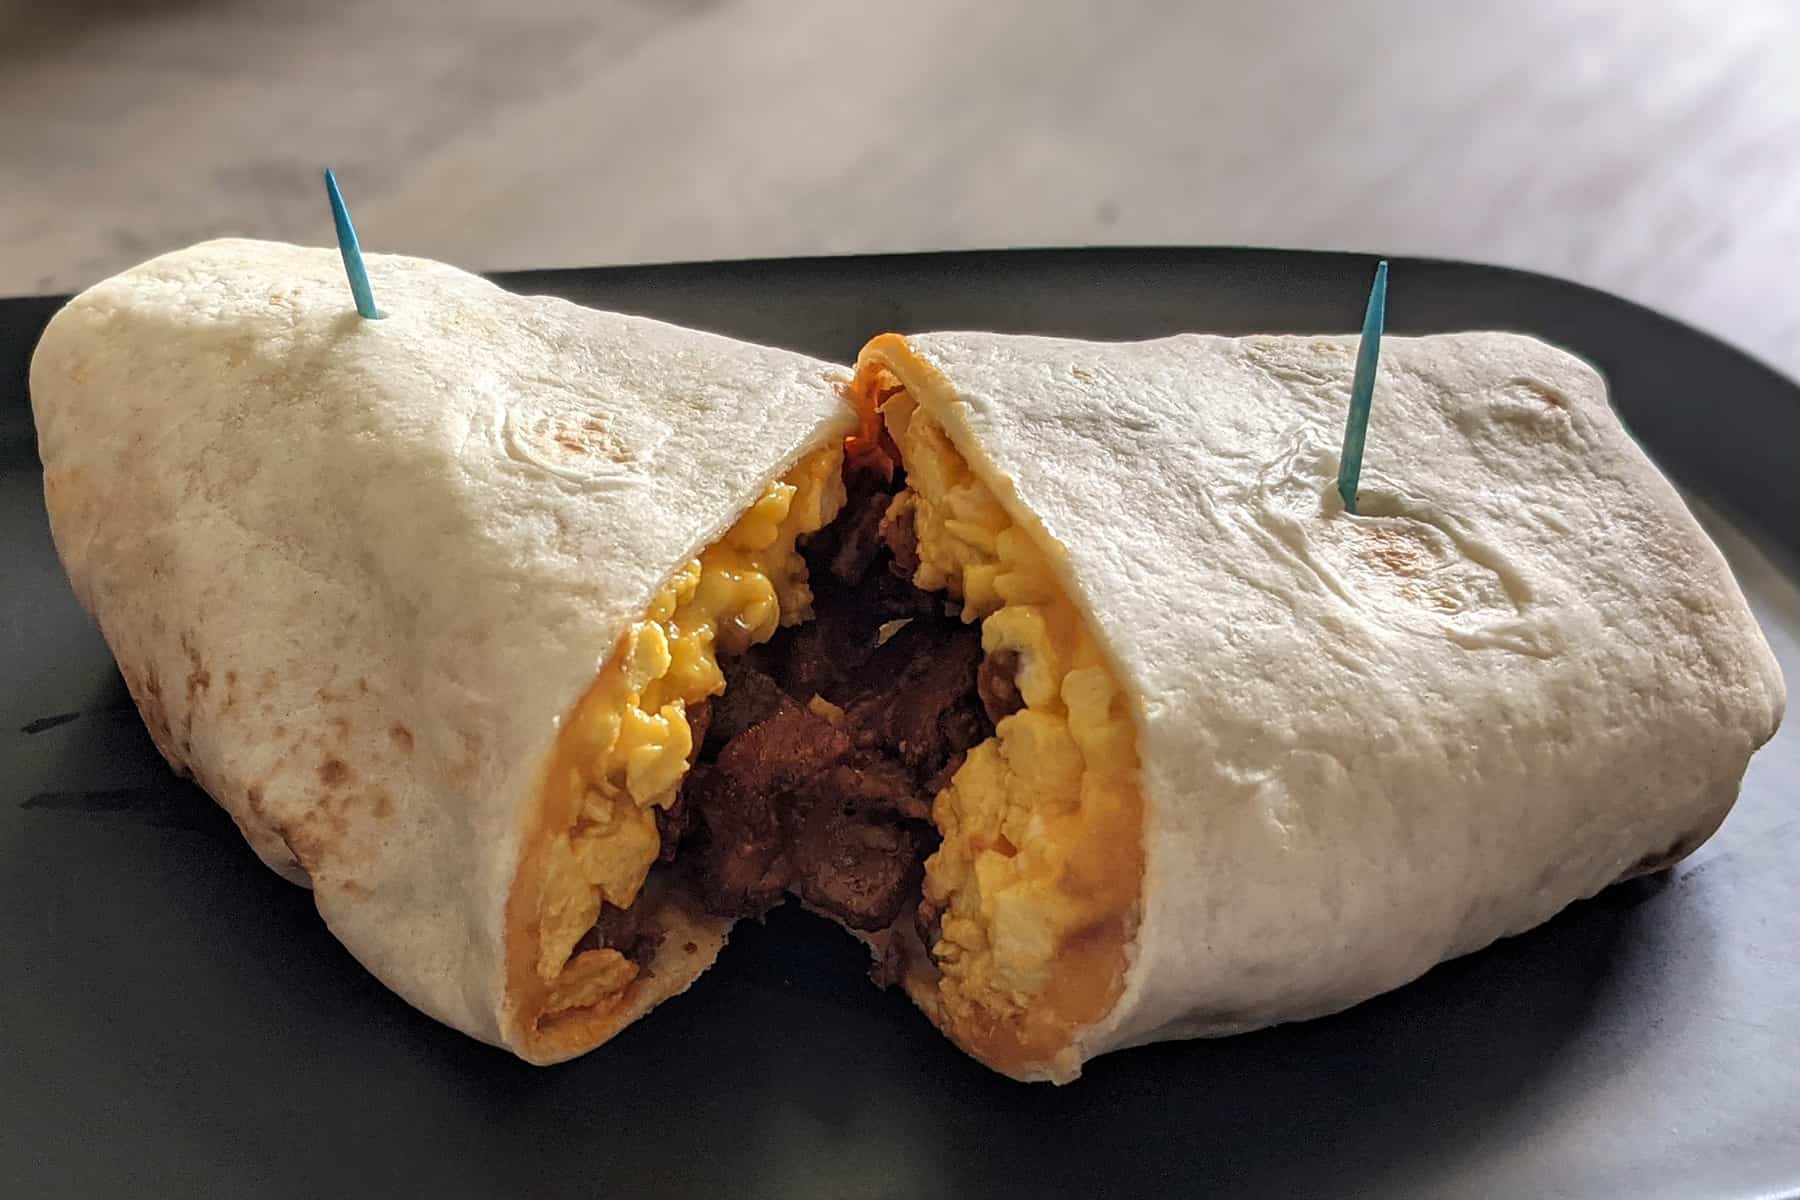 A breakfast wrap cut in half to show the inside filled with cheesy eggs, bacon, fried potatoes, and hot sauce